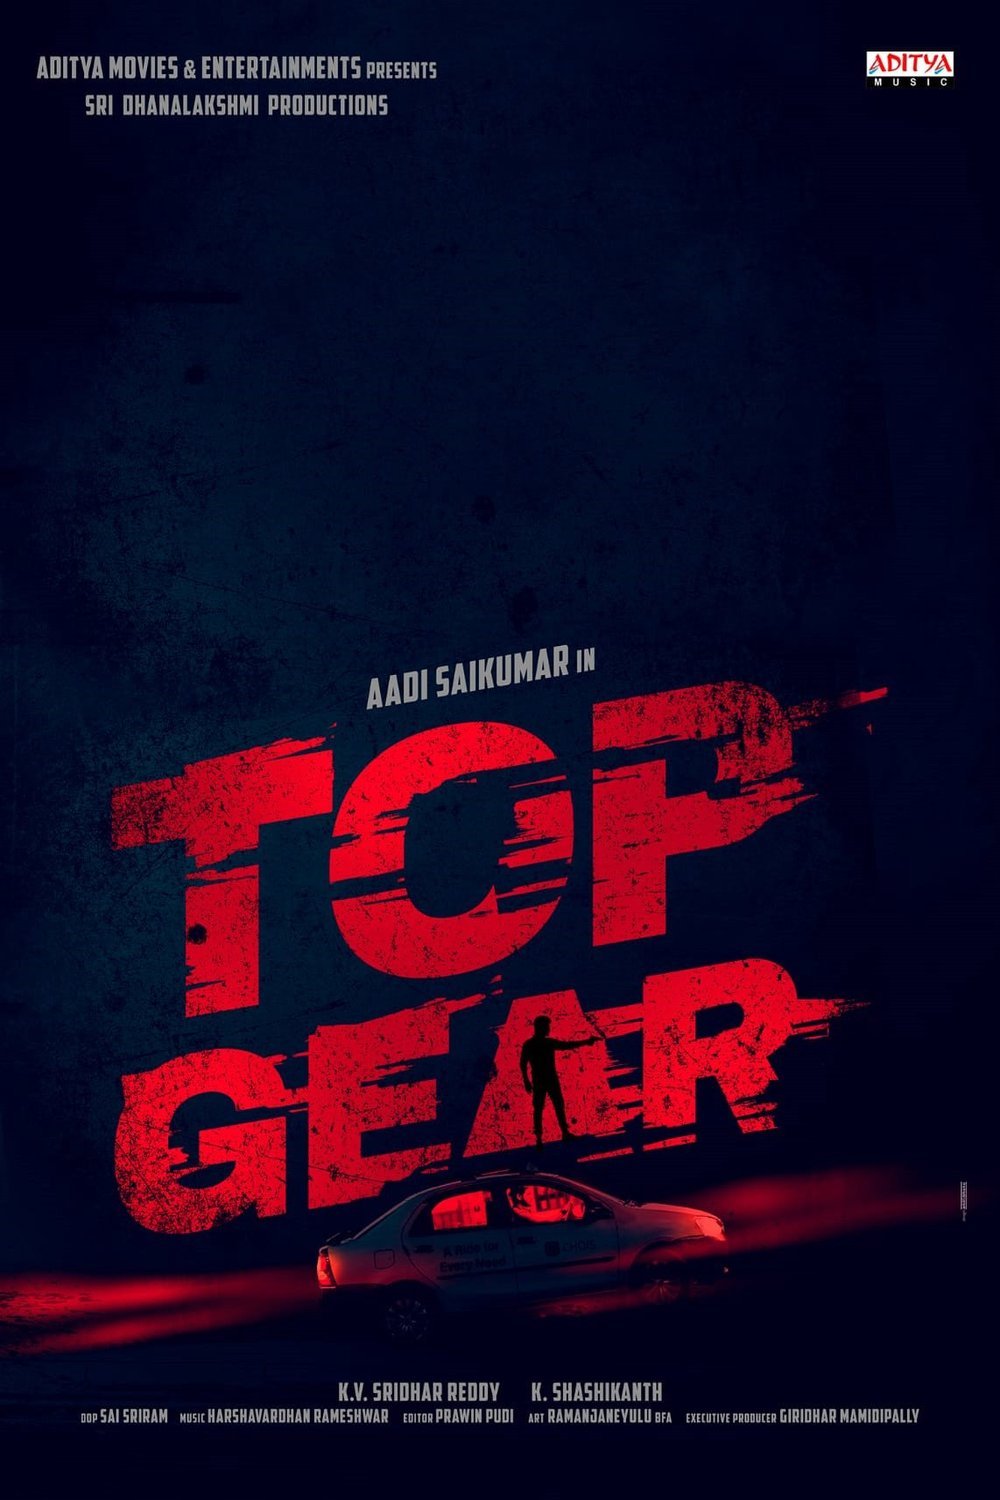 Telugu poster of the movie Top Gear